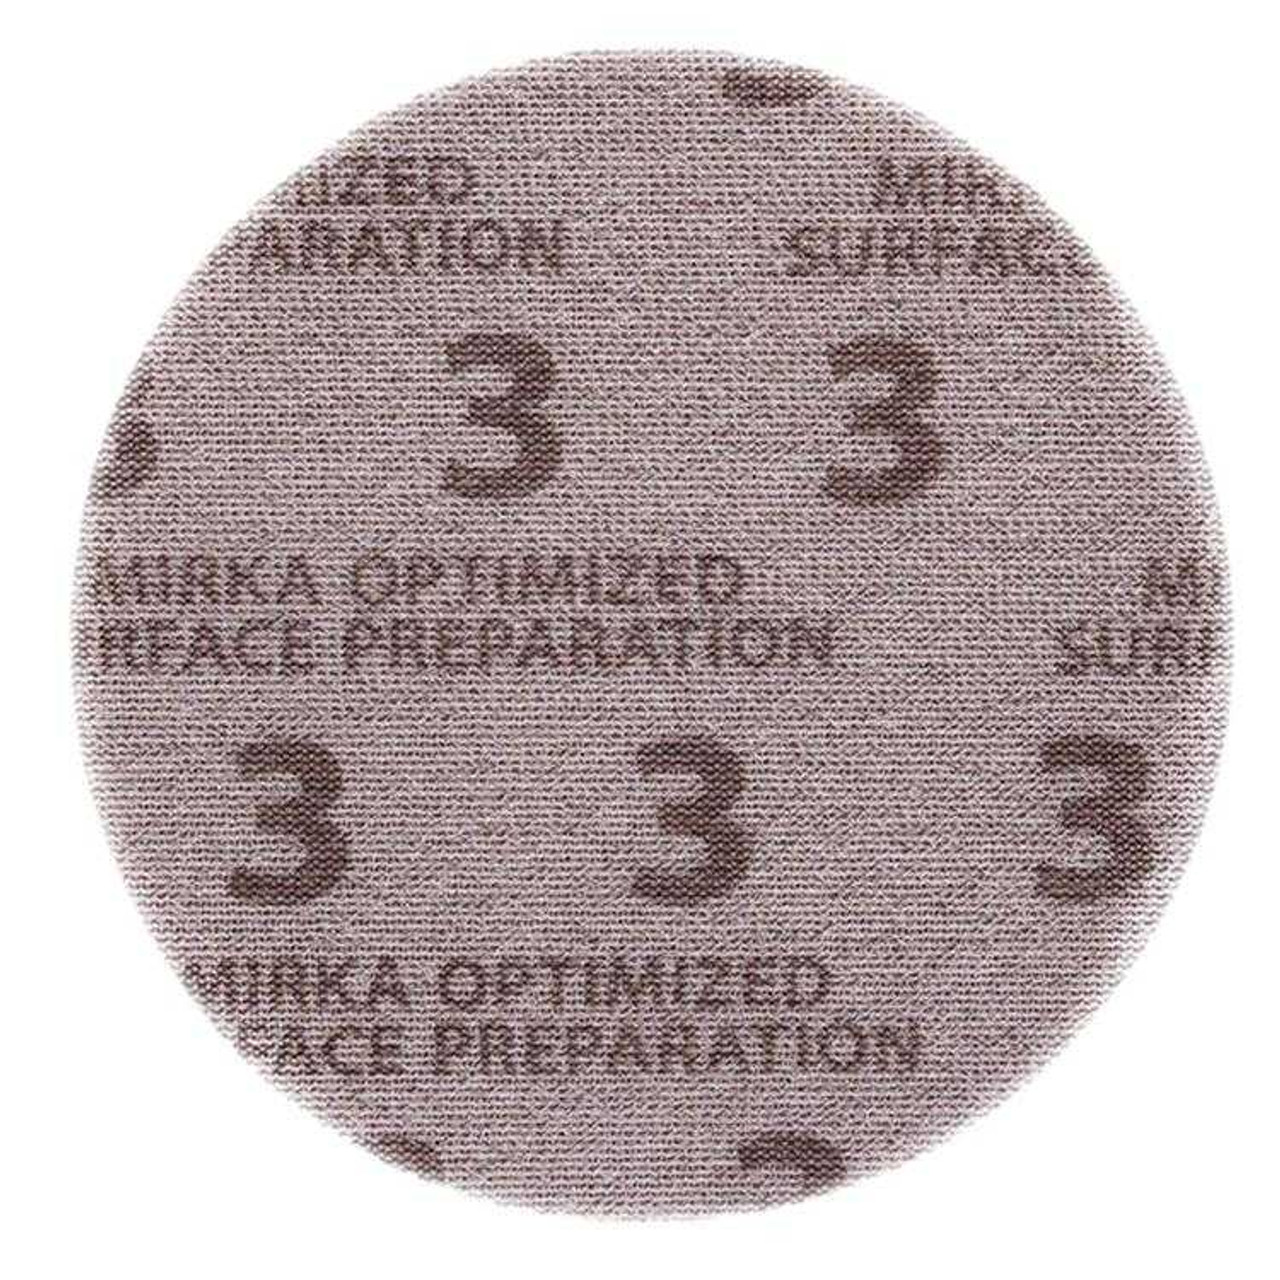 6 in. Diameter Disc, OS Series - Optimized Surface Preparation Product, Step 3, Qty. 50